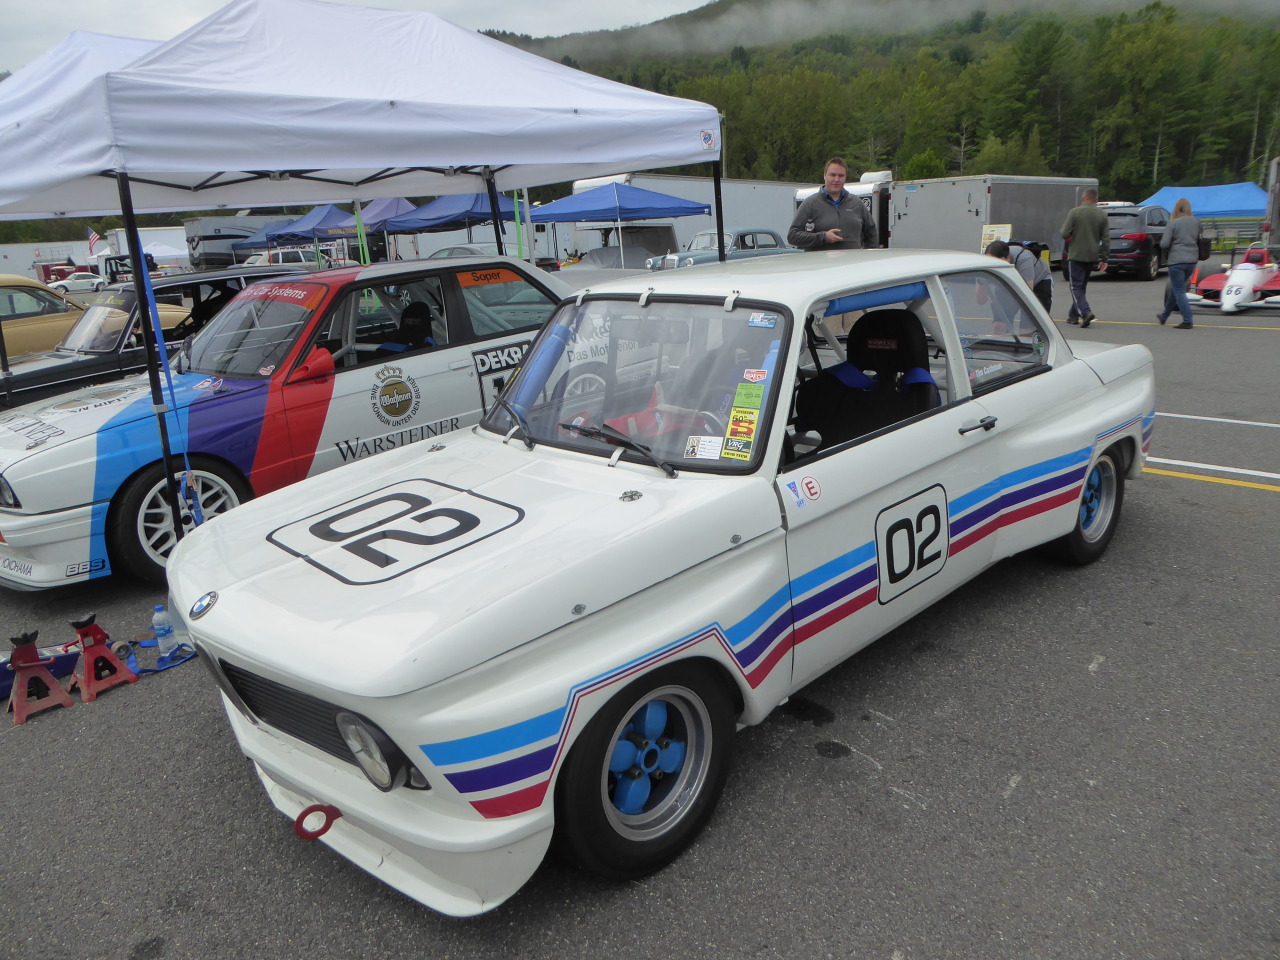 This retro-looking BMW 2002 was one of my favorite competition cars at Lime Rock Historic Festival 2021. #classic#custom#race#car#cars#auto#car show#bmw#2002#widebody#lime rock